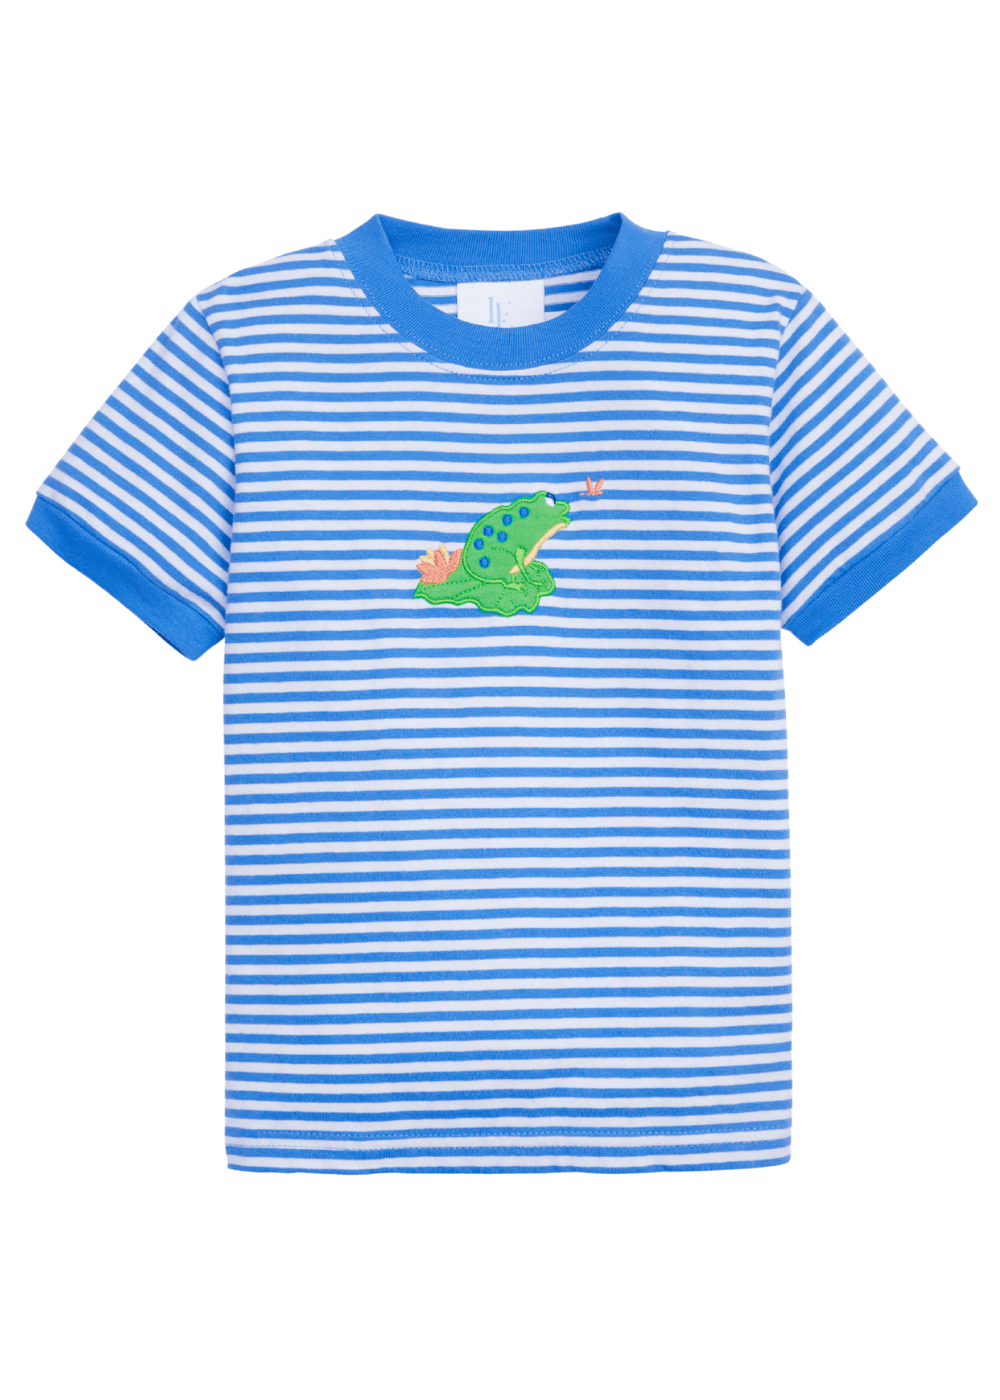 classic childrens clothing blue and white striped t-shirt with applique frog